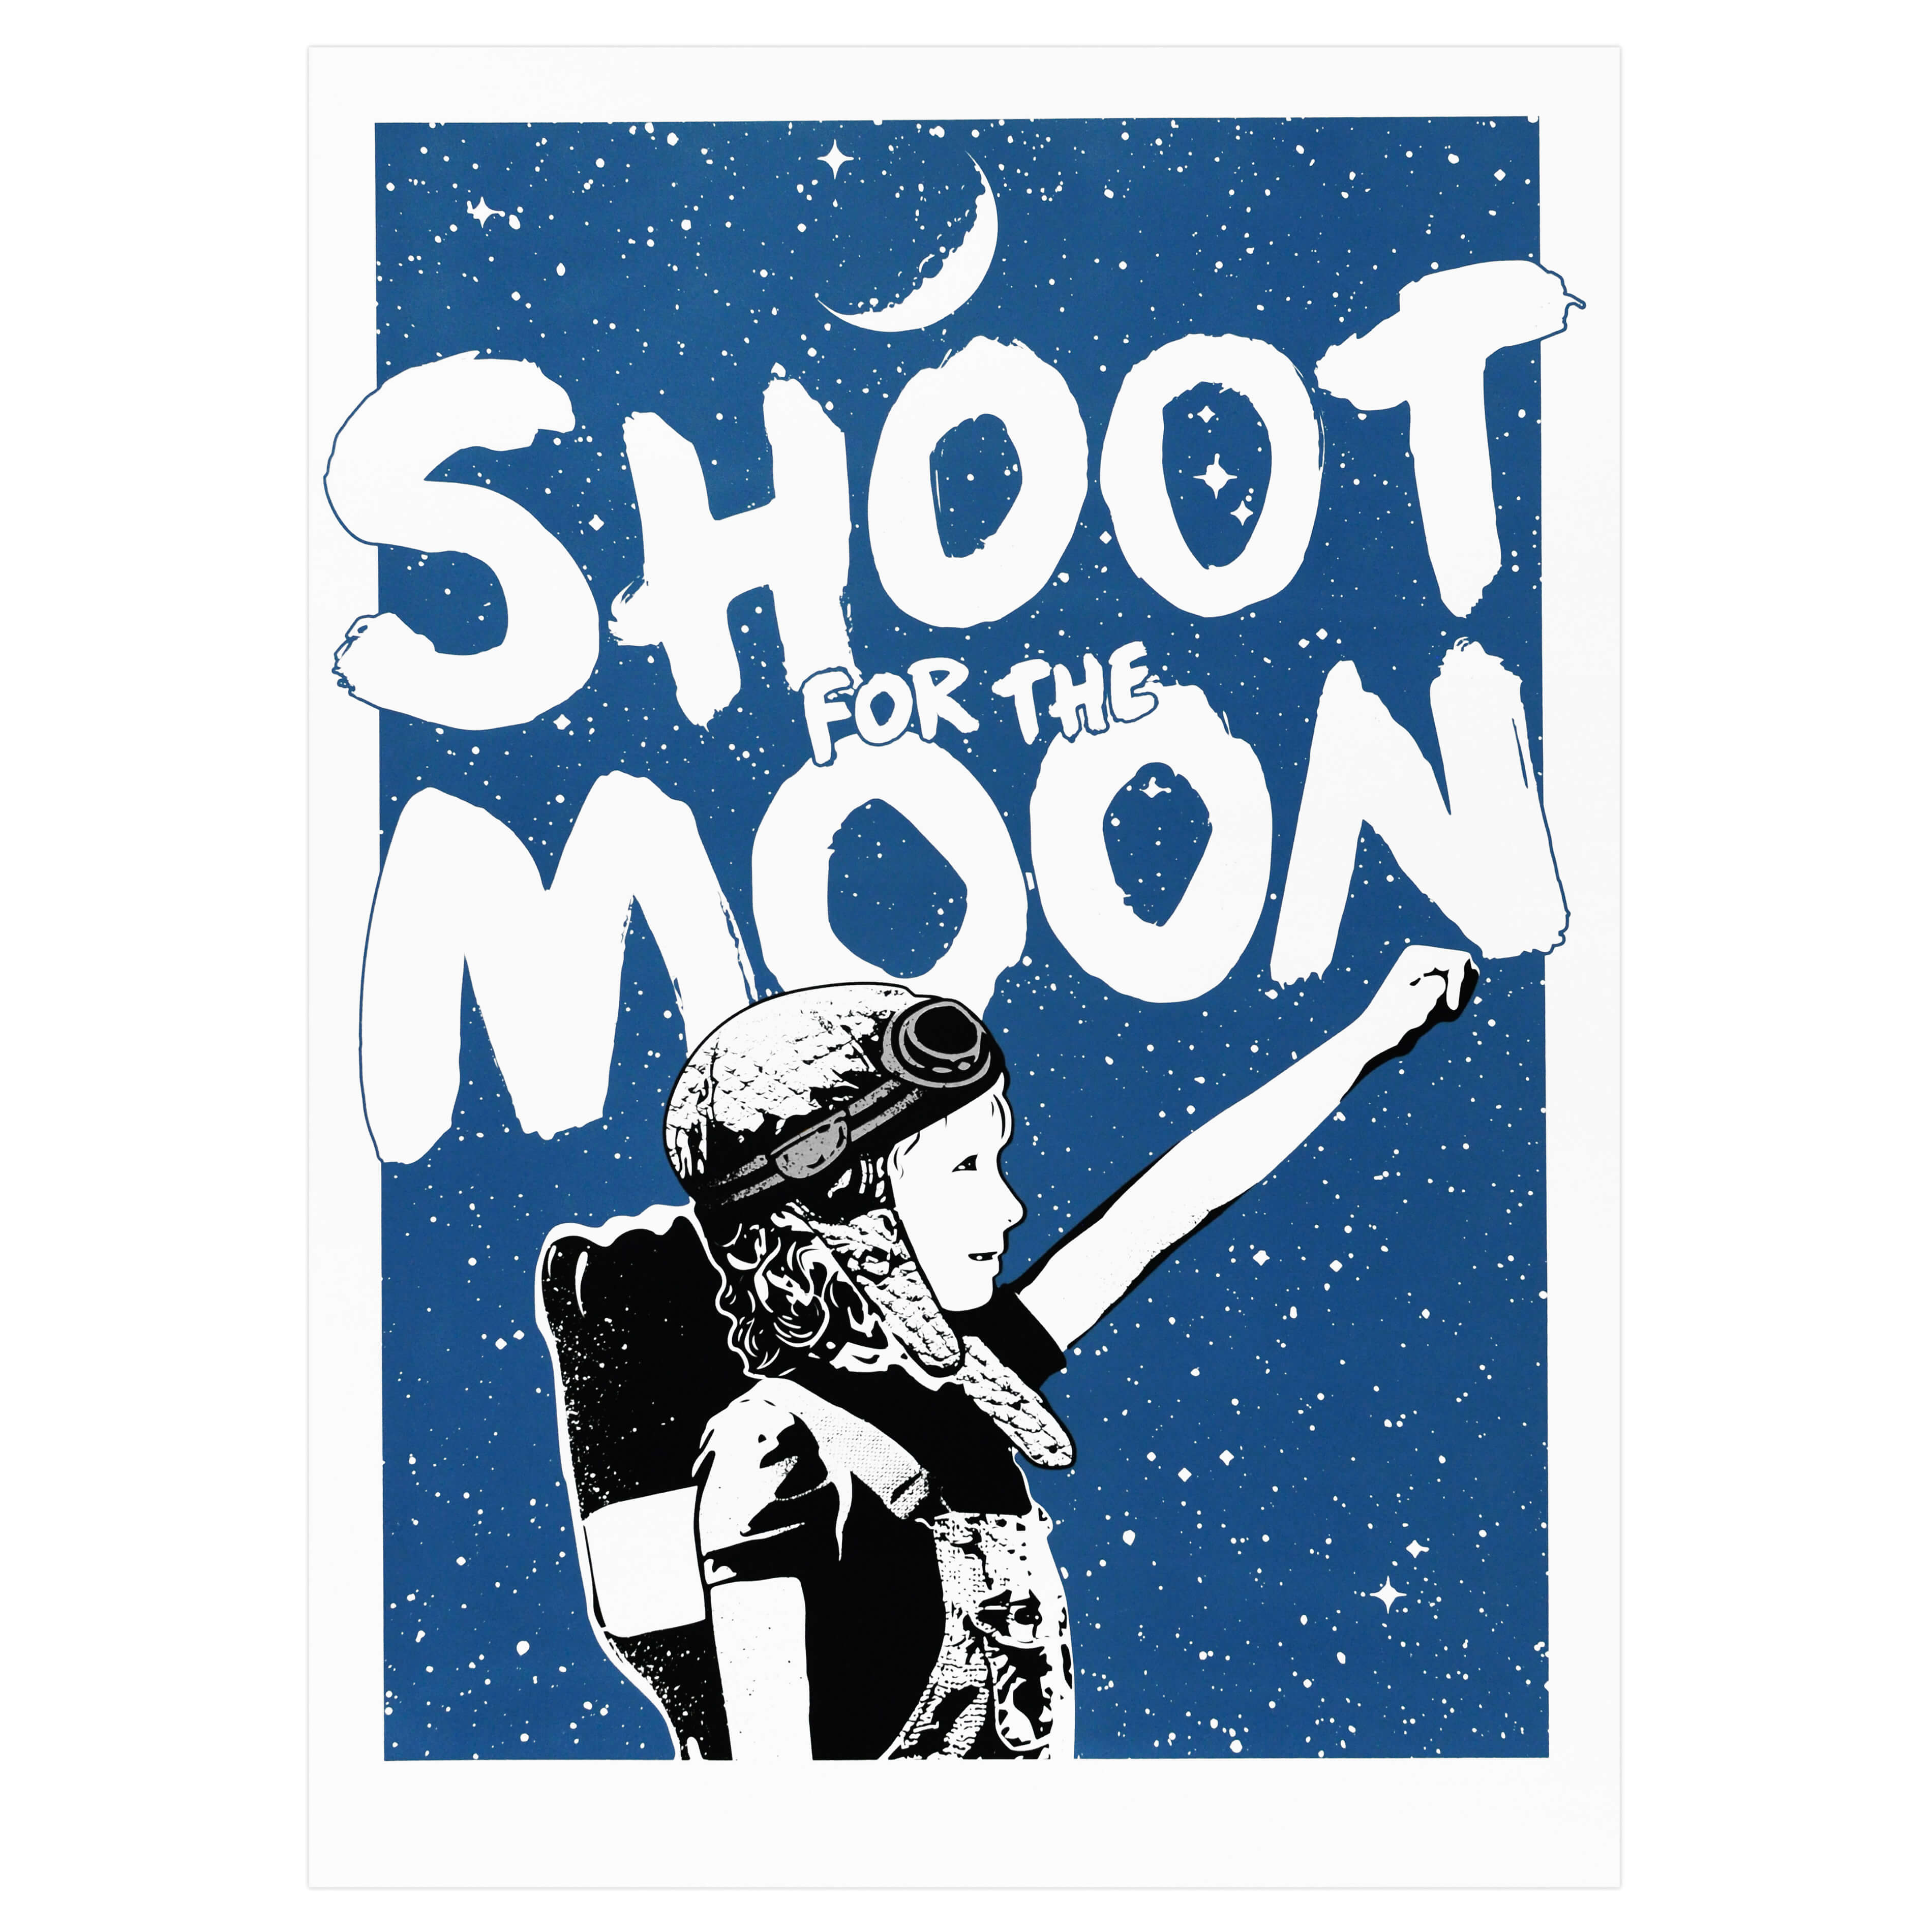 NME - Shoot For The Moon (Silver Edition) Print Detail